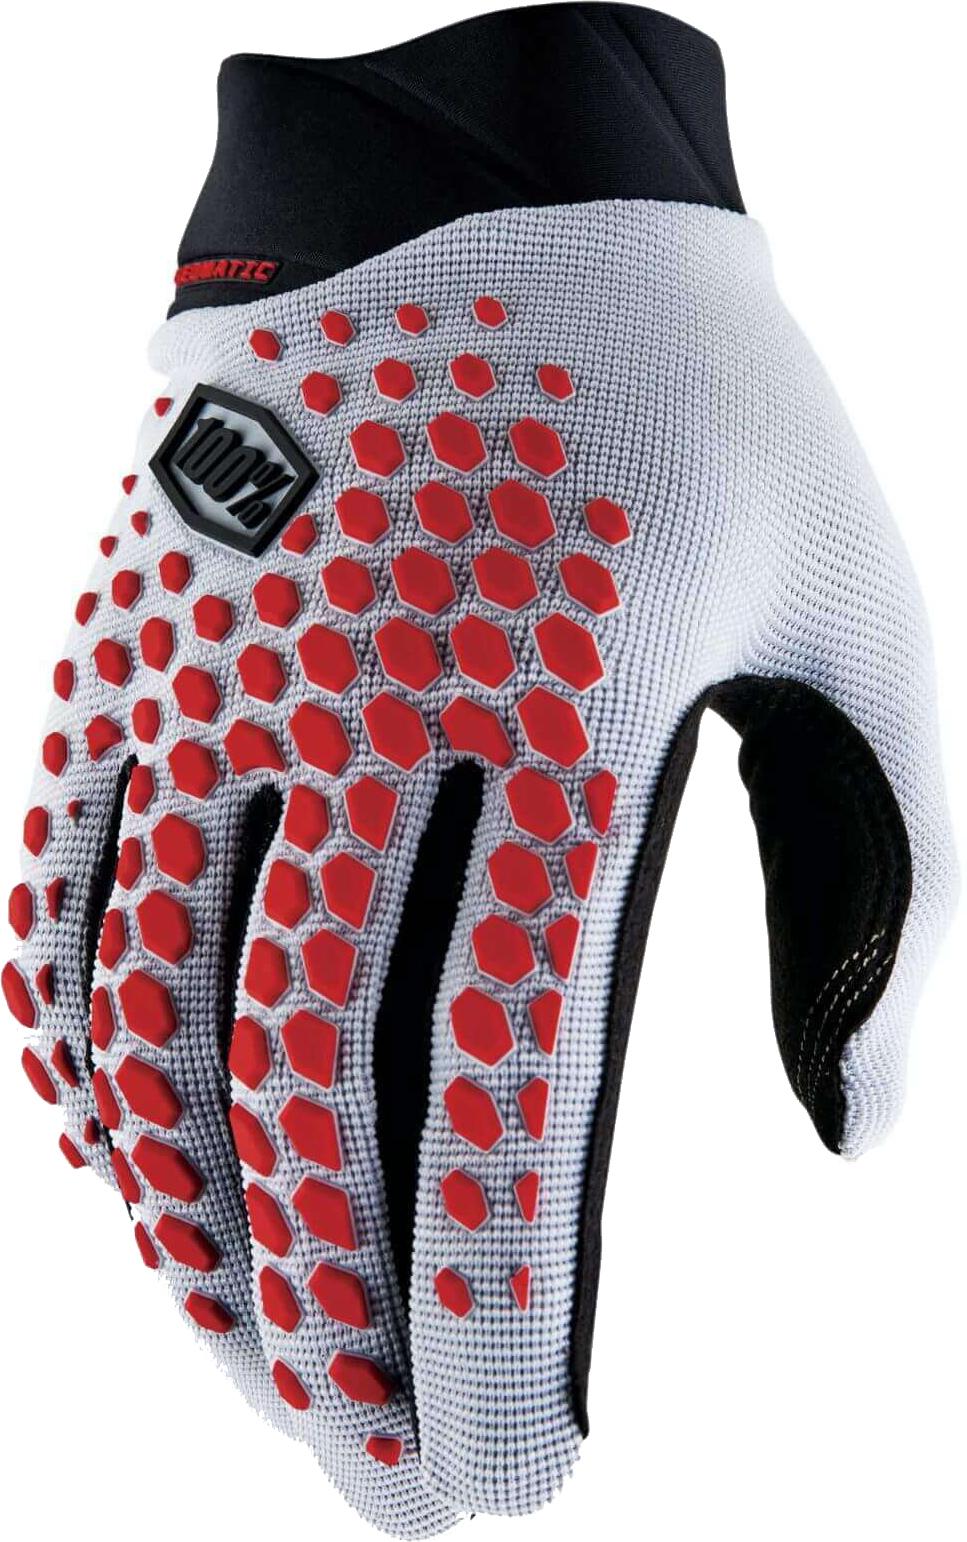 100% Geomatic Glove Ss22  Grey/racer Red